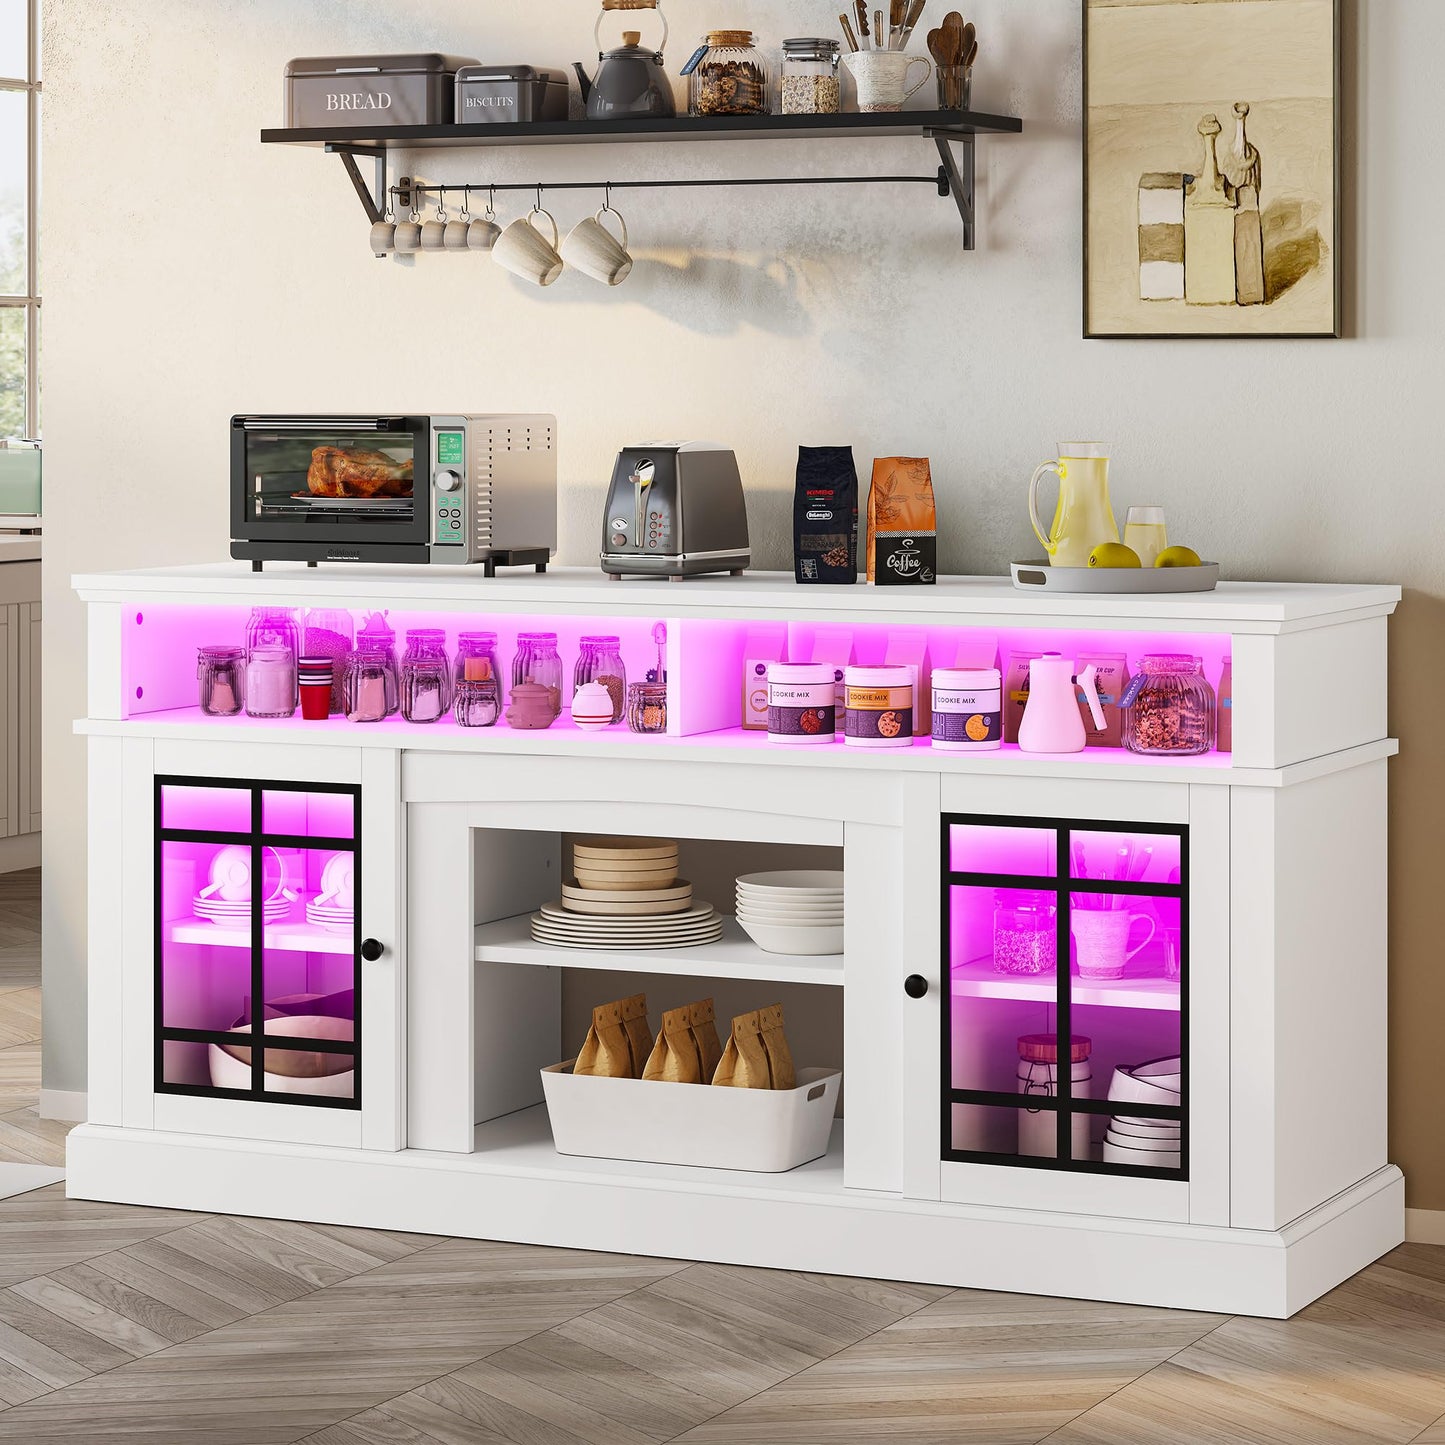 YITAHOME Farmhouse Sideboard Buffet Cabinet with LED Light, 65'' Large Kitchen Cabinet w/Storage, Tempered Glass Doors, Adjustable Shelf, 32'' Tall Coffee Bar Table for Living Room, Dining Room, White